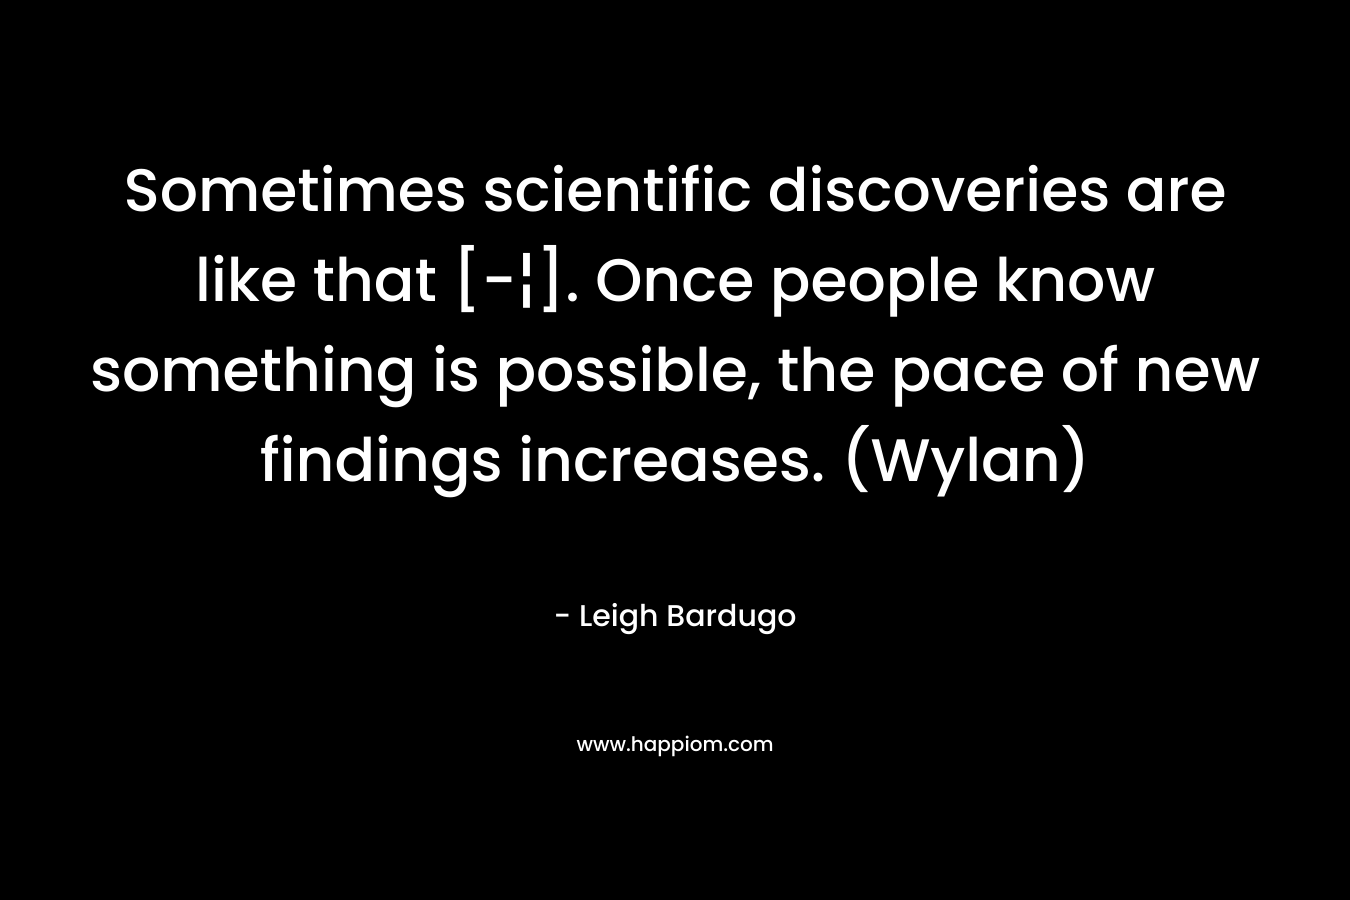 Sometimes scientific discoveries are like that [-¦]. Once people know something is possible, the pace of new findings increases. (Wylan)